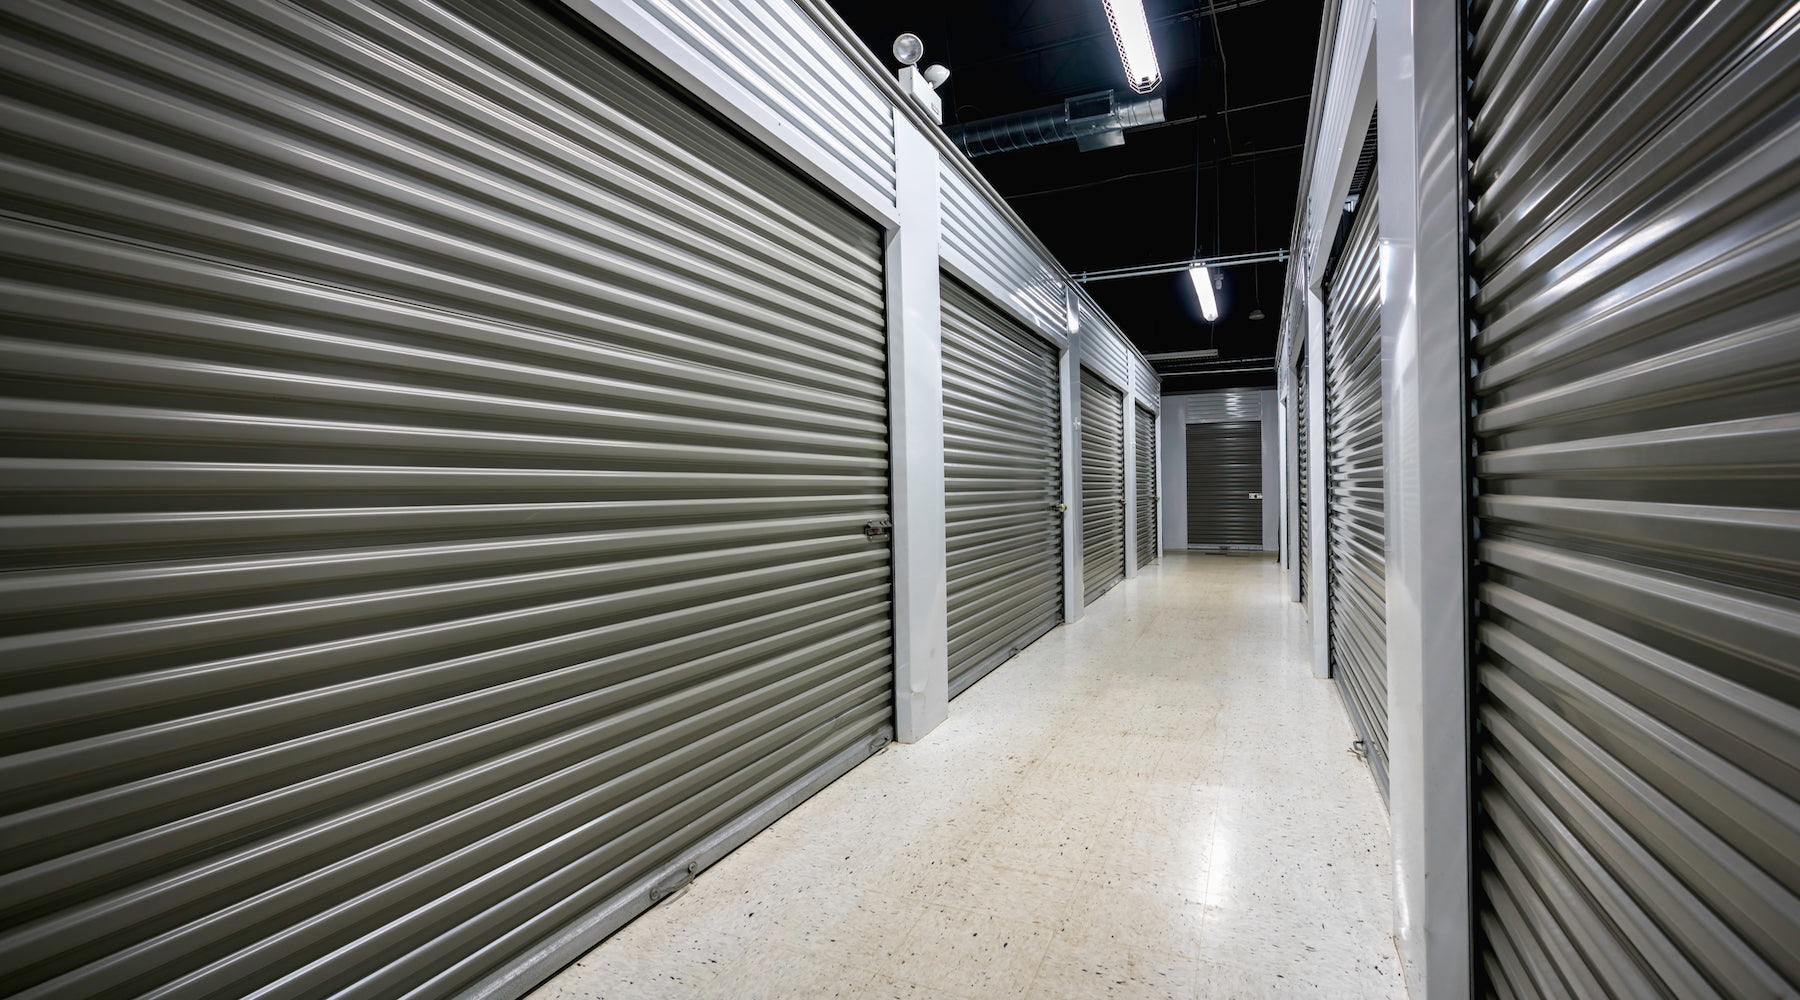 Storage unit lighting installed in large storage facility corridor with garage doors